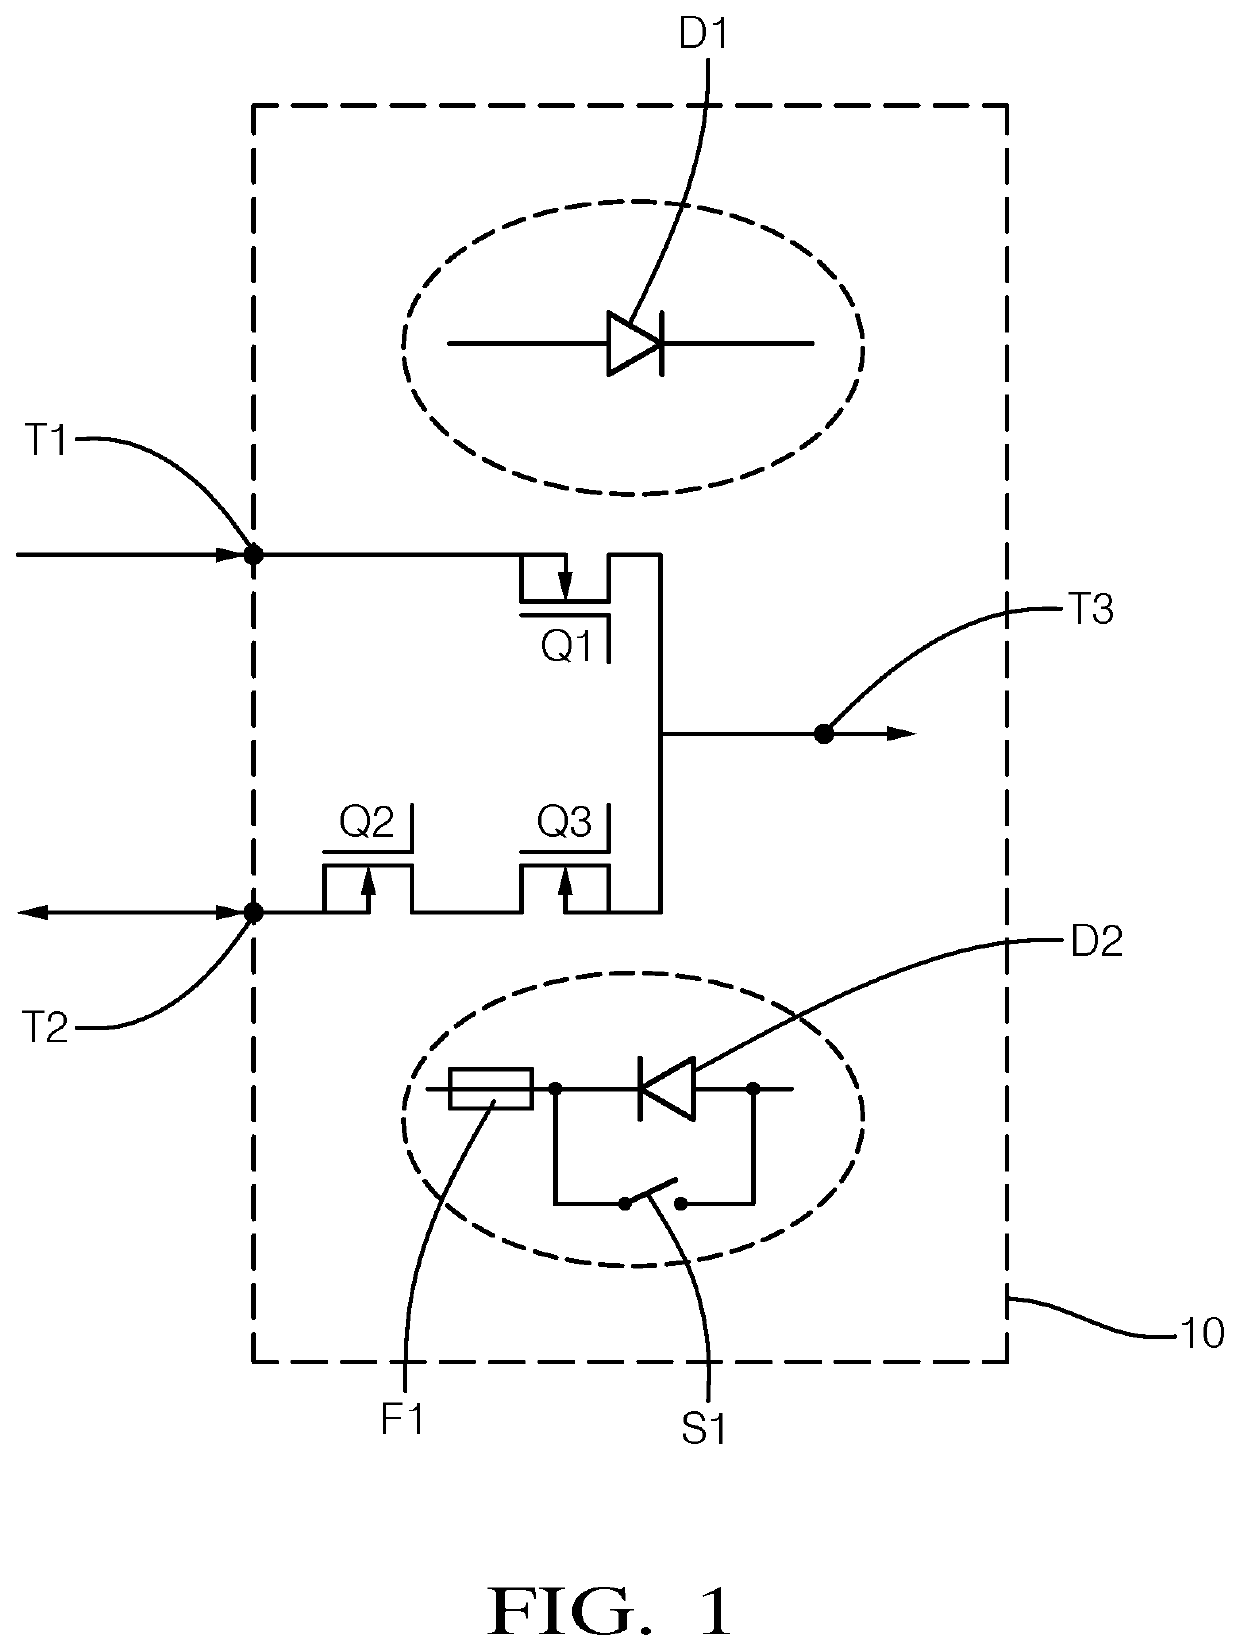 Electronic circuit for redundant supply of an electric load